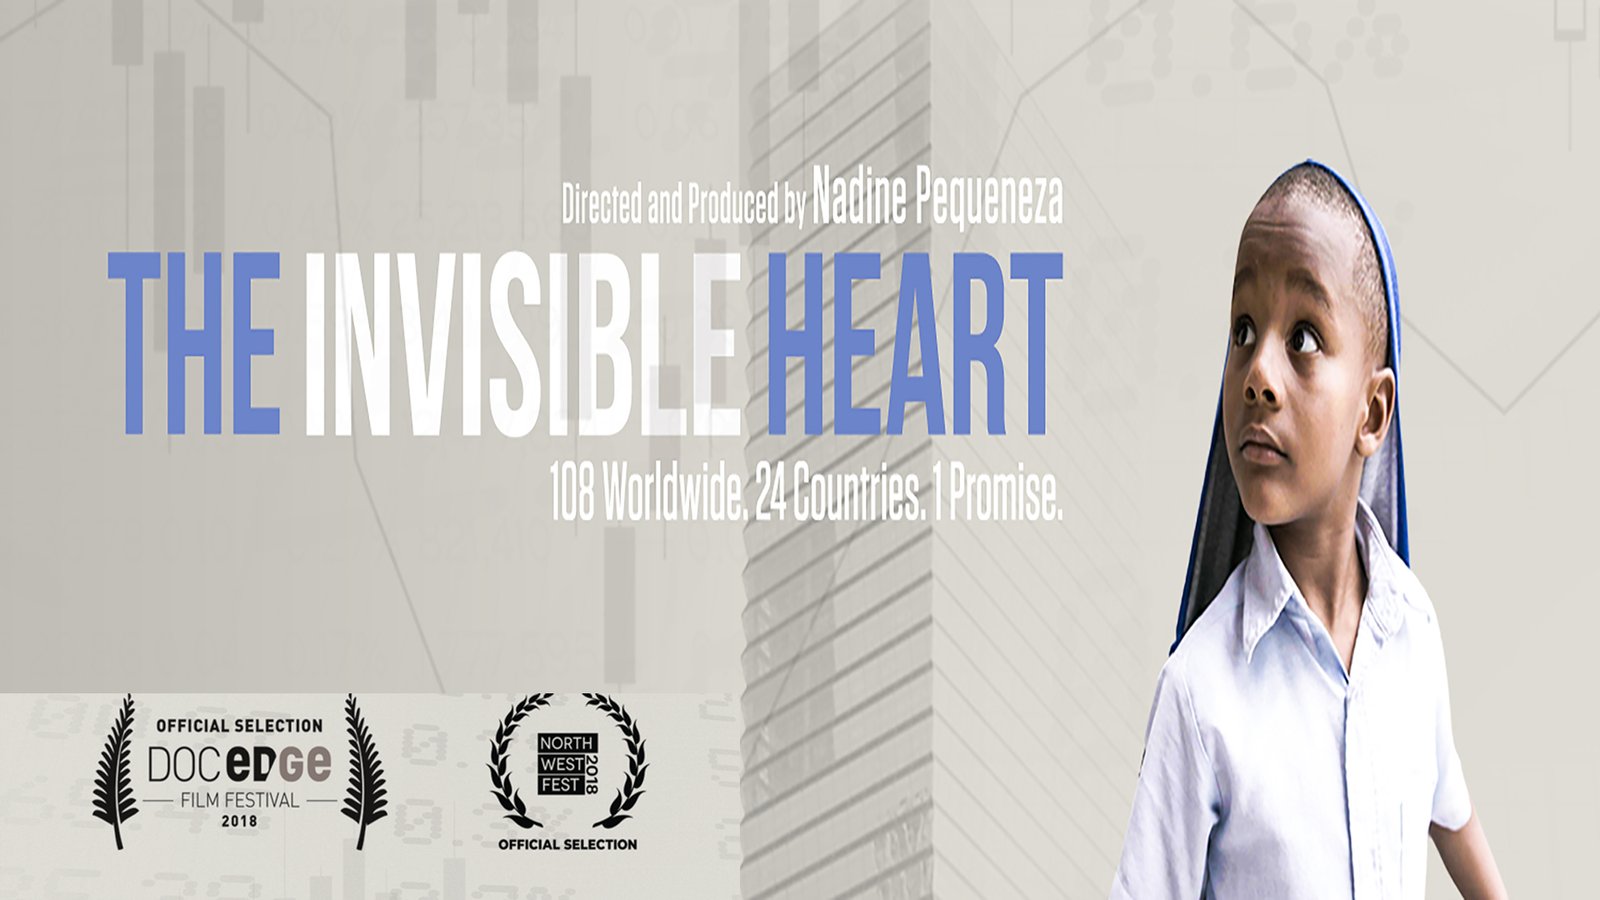 The Invisible Heart - Social Impact Bonds: Where Capitalism and Charity Intersect